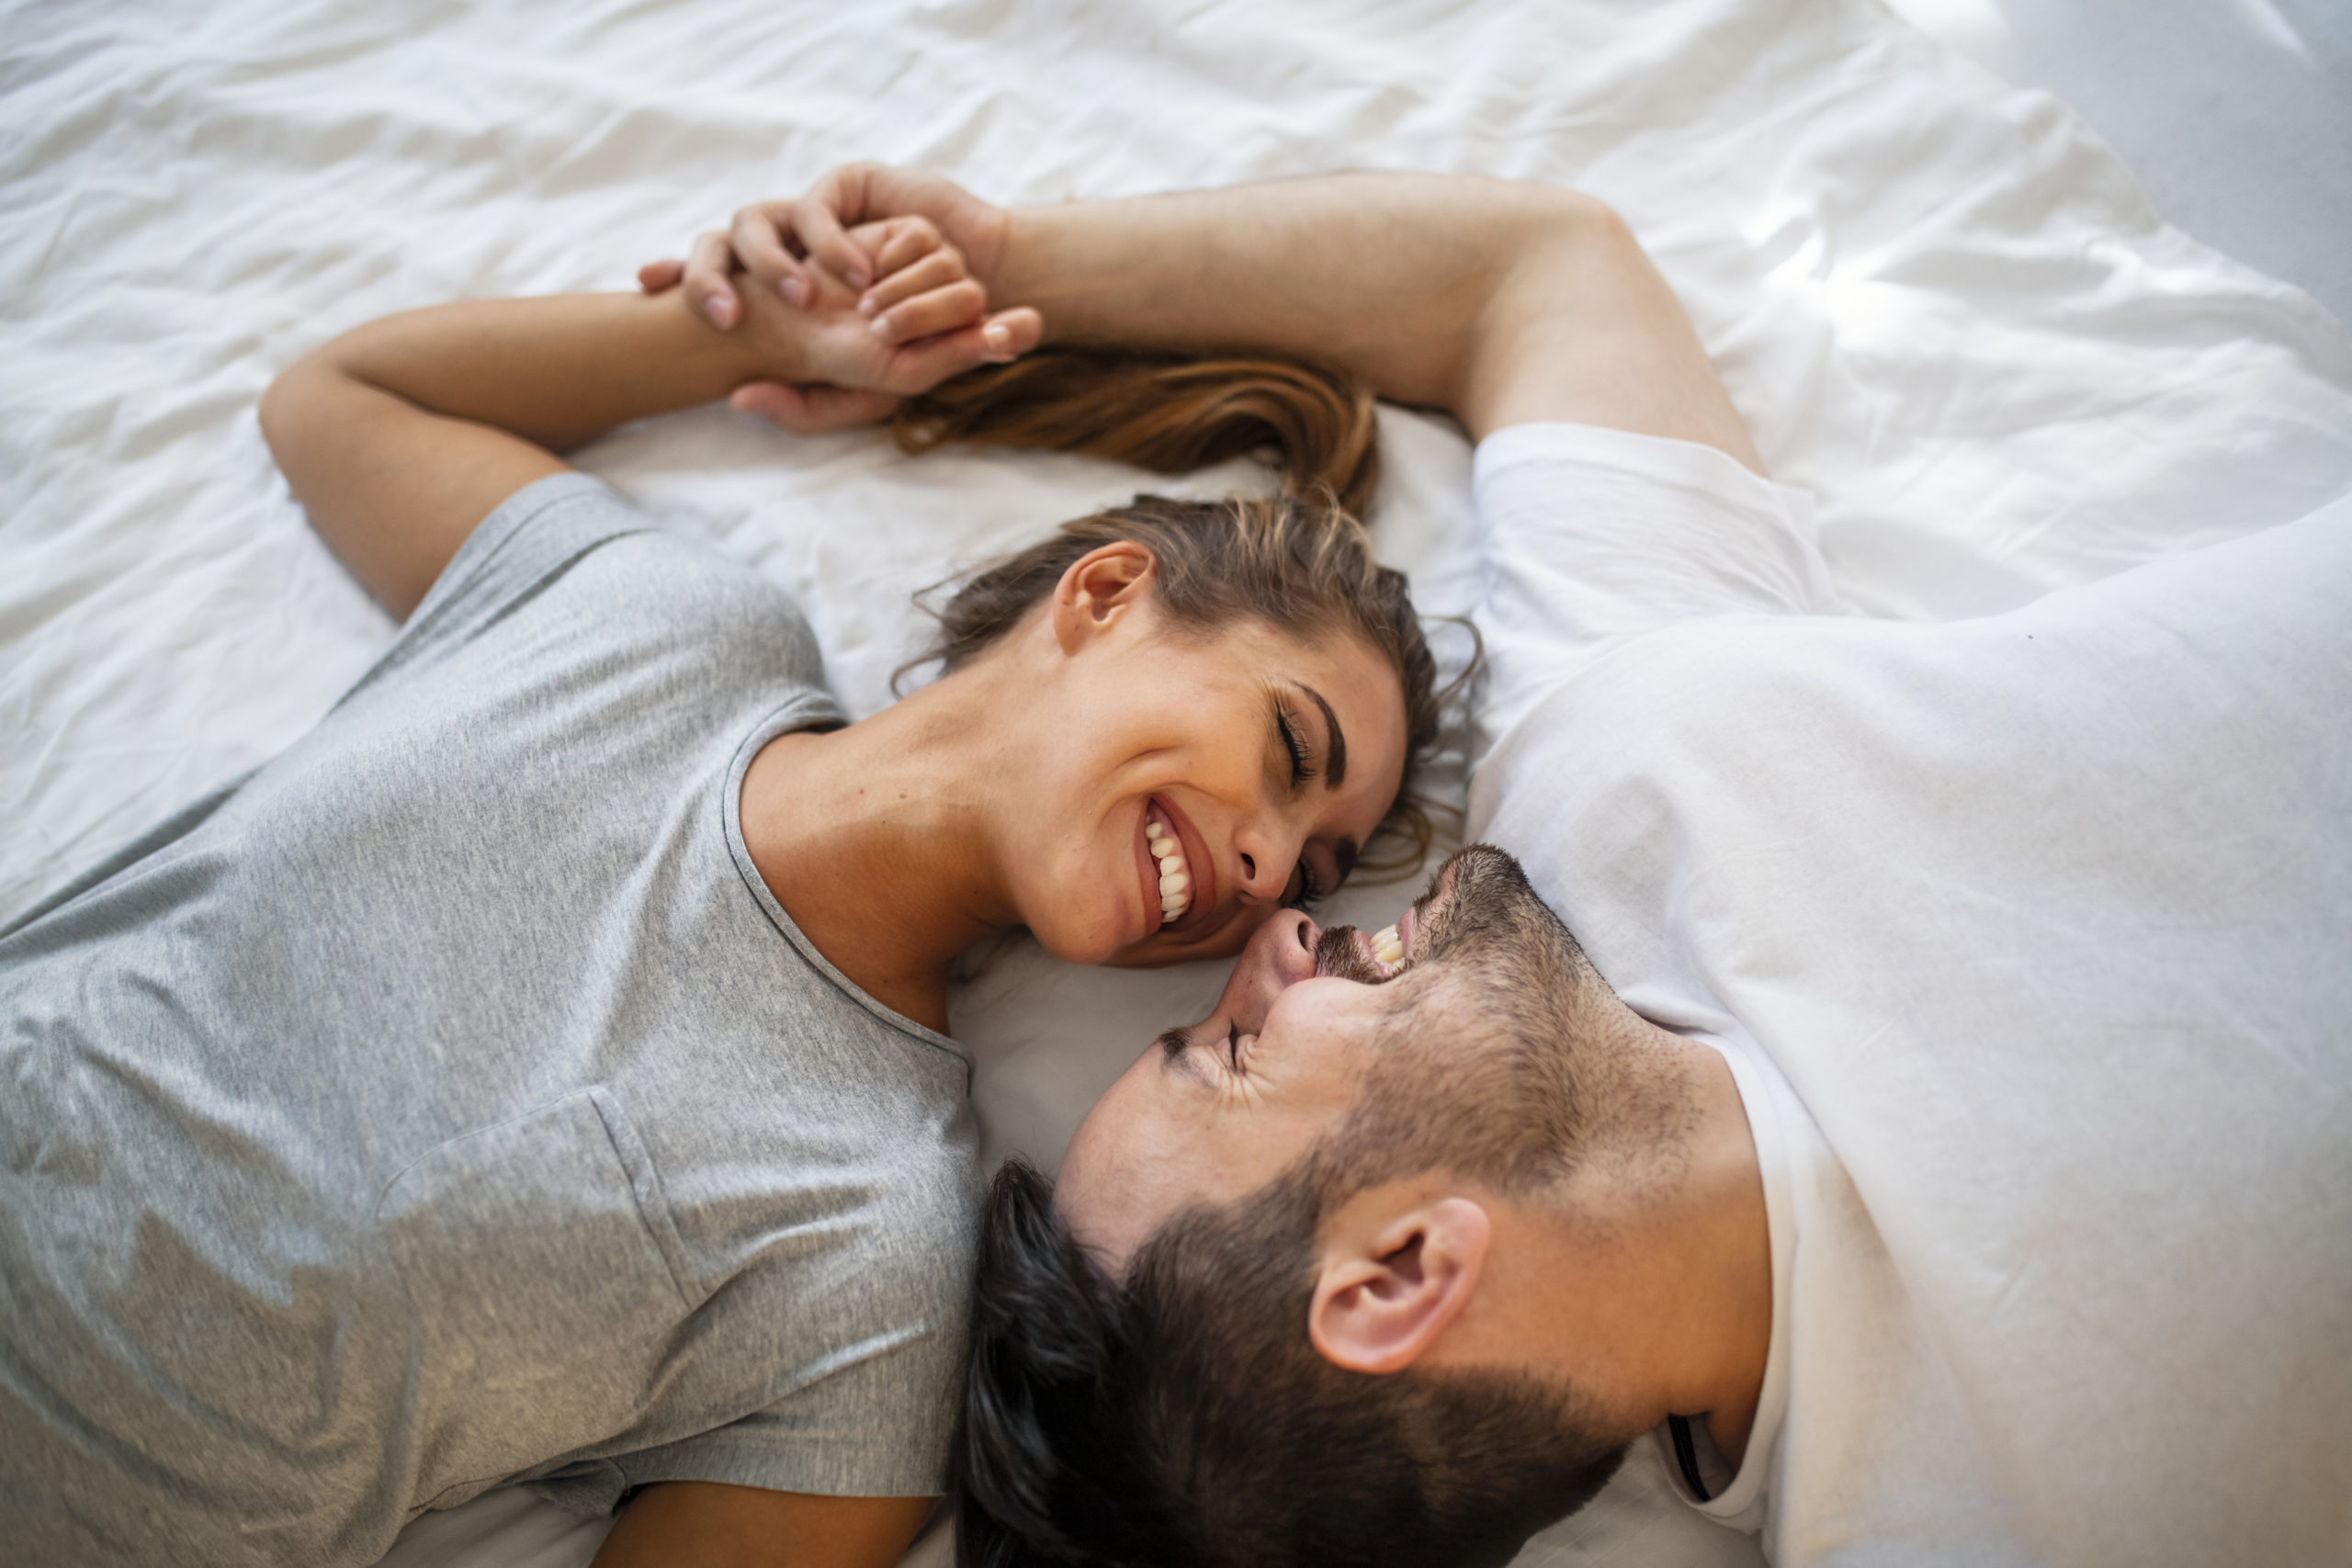 Types of sex-affective relationships: Find out which one suits you best